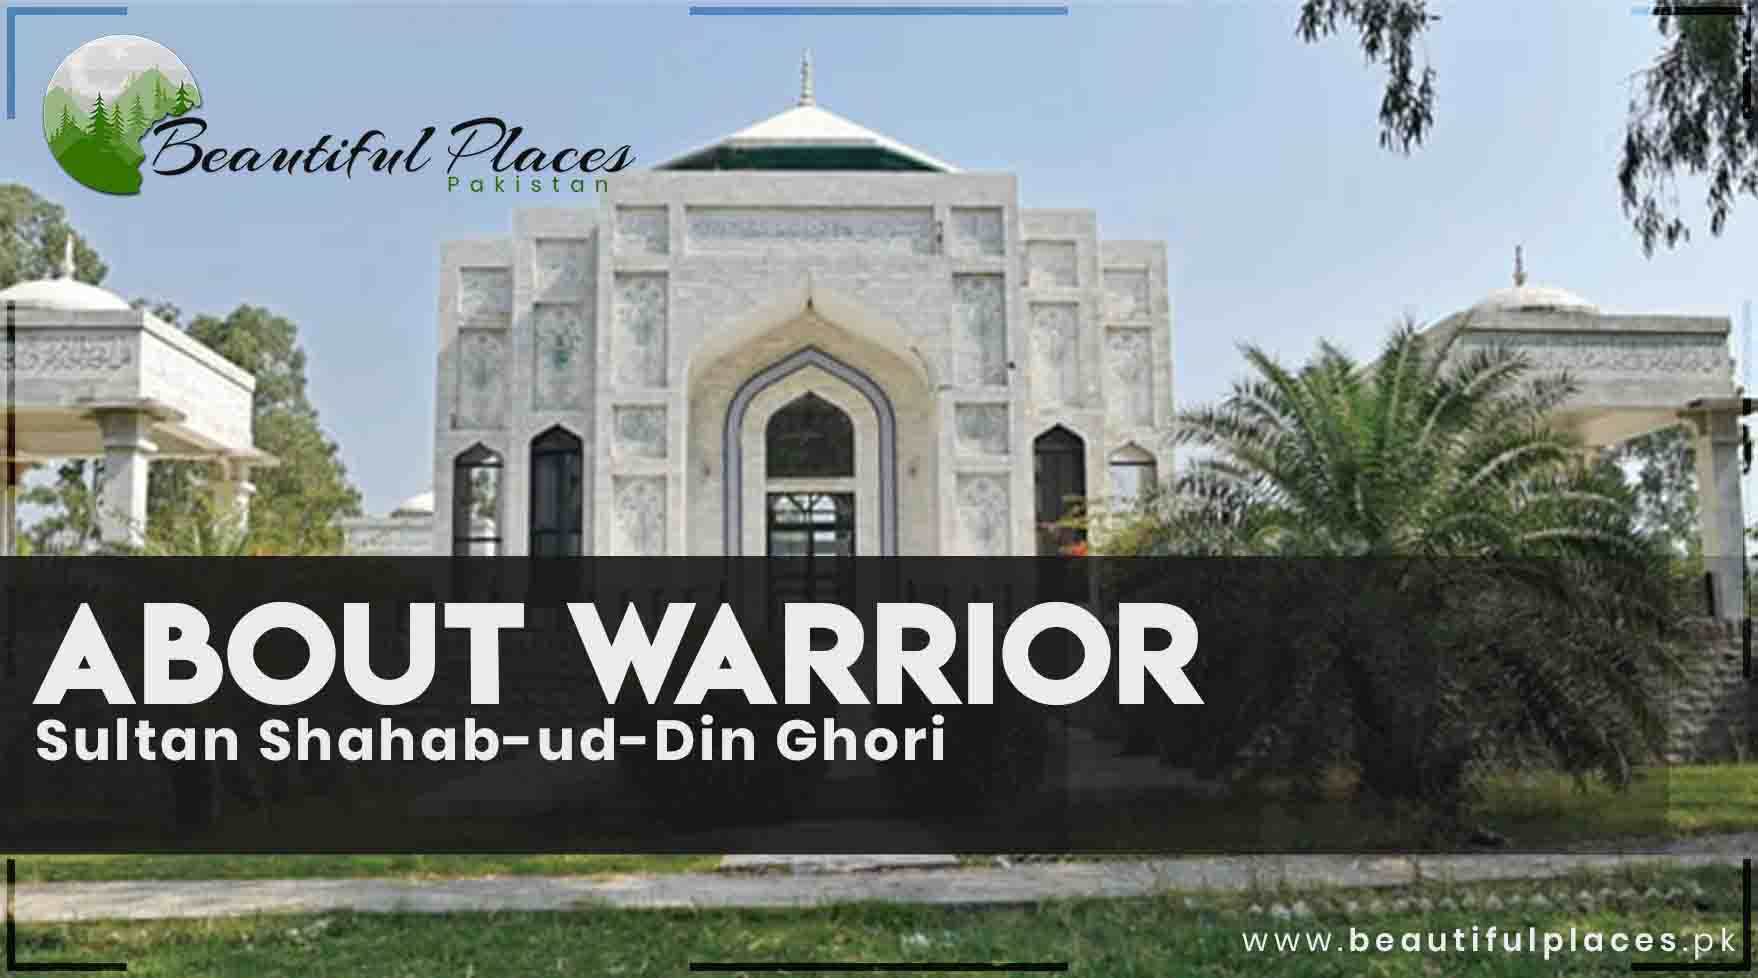 About Warrior Sultan Shahab-ud-Din Ghori